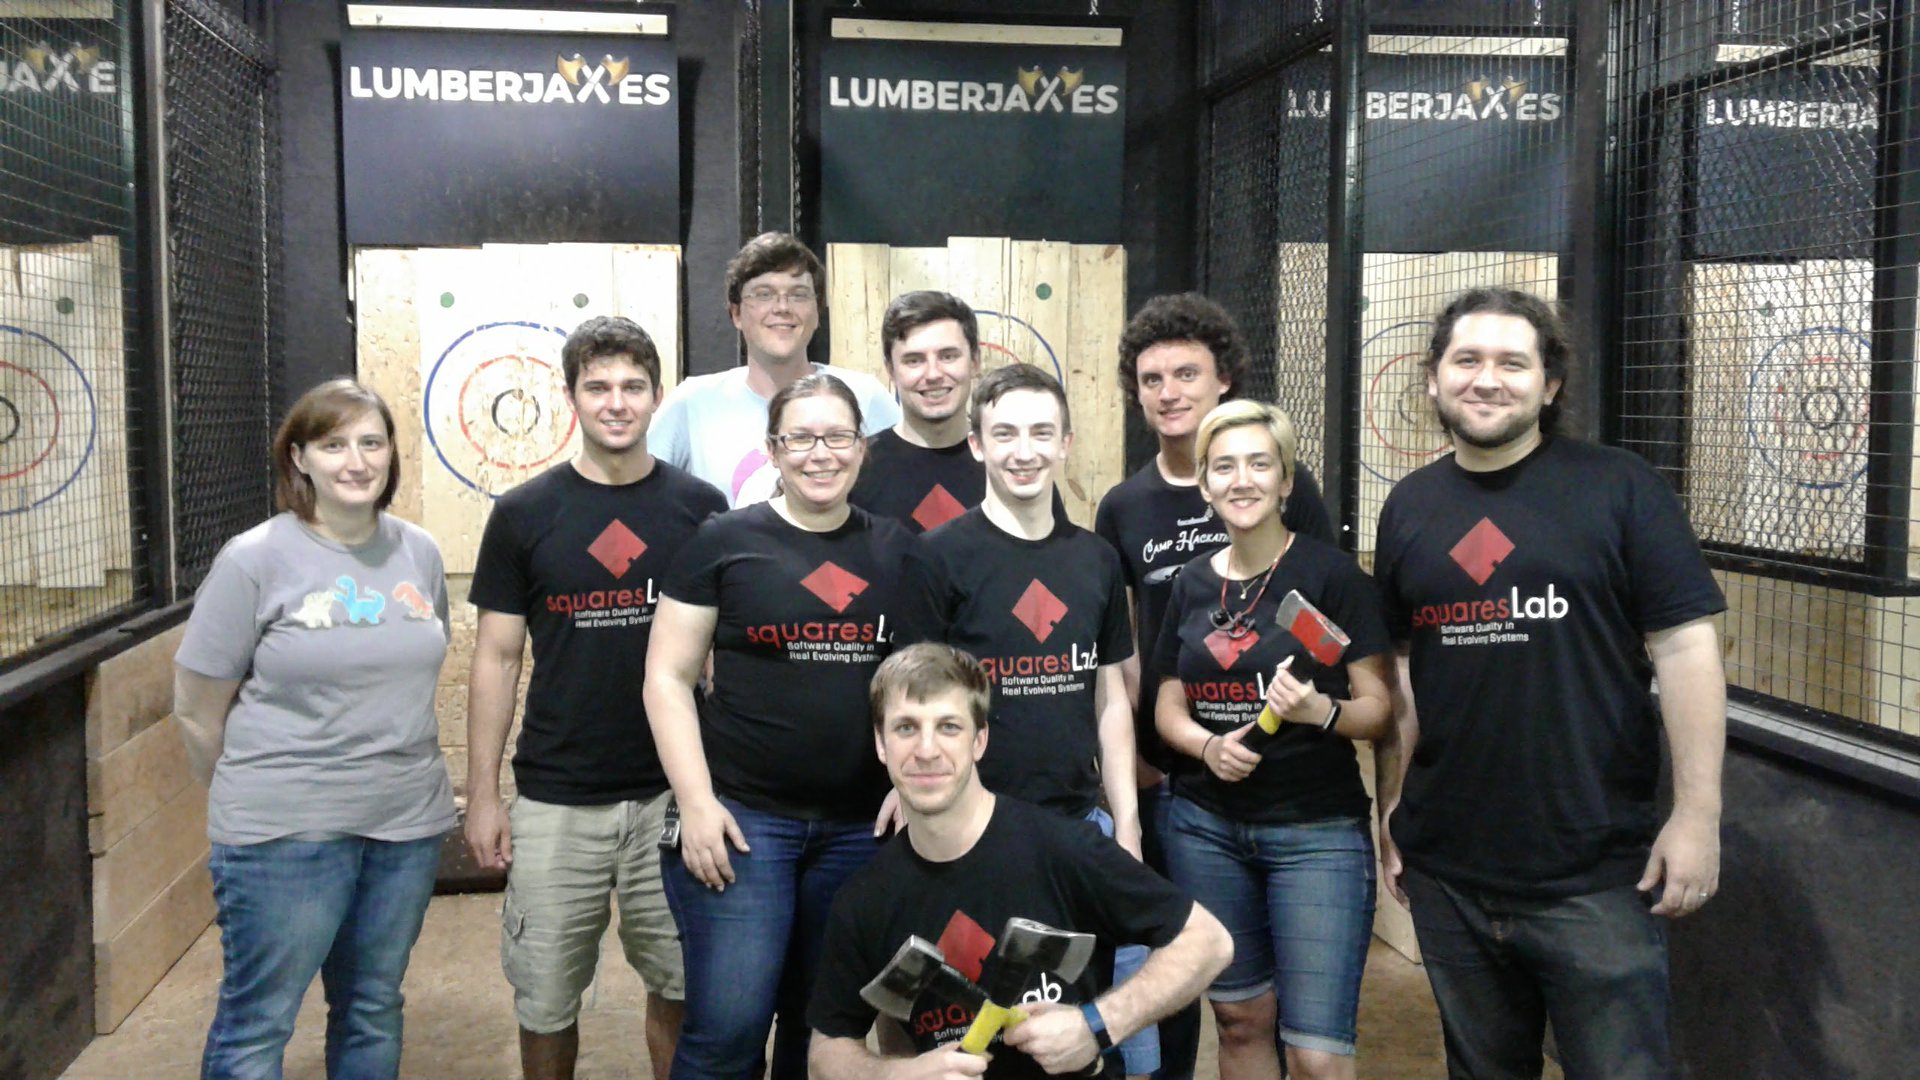 squaresLab in our squaresLab t-shirts after an axe throwing social event